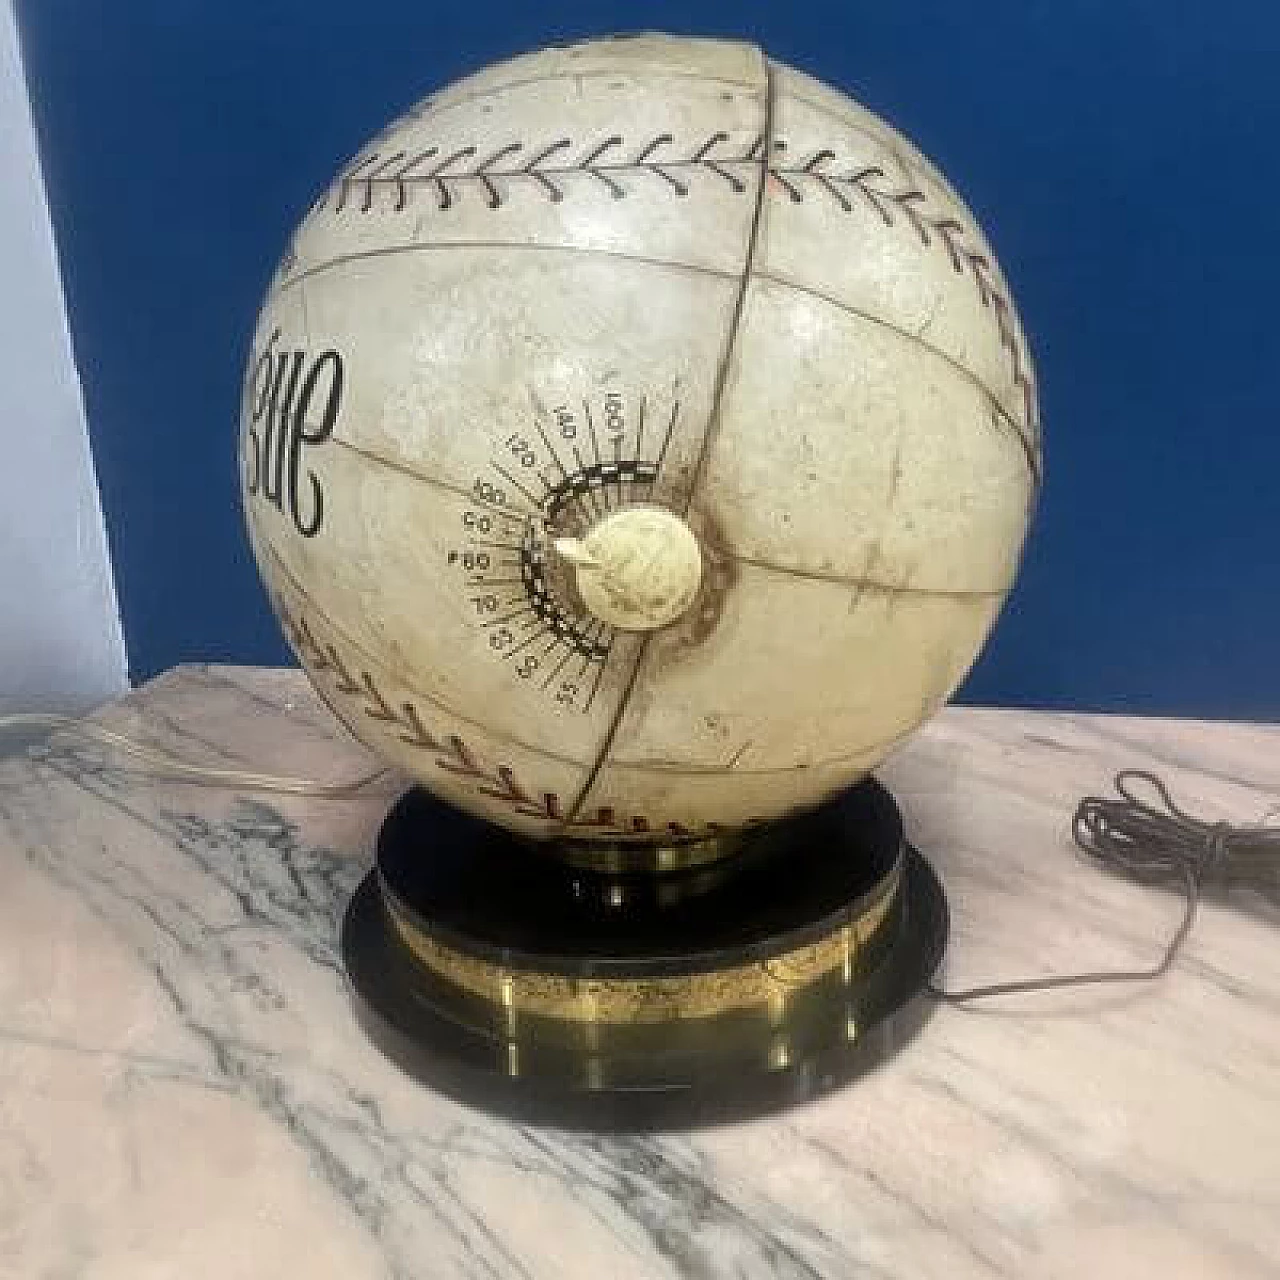 Radio trophy in the shape of a baseball, 1941 5